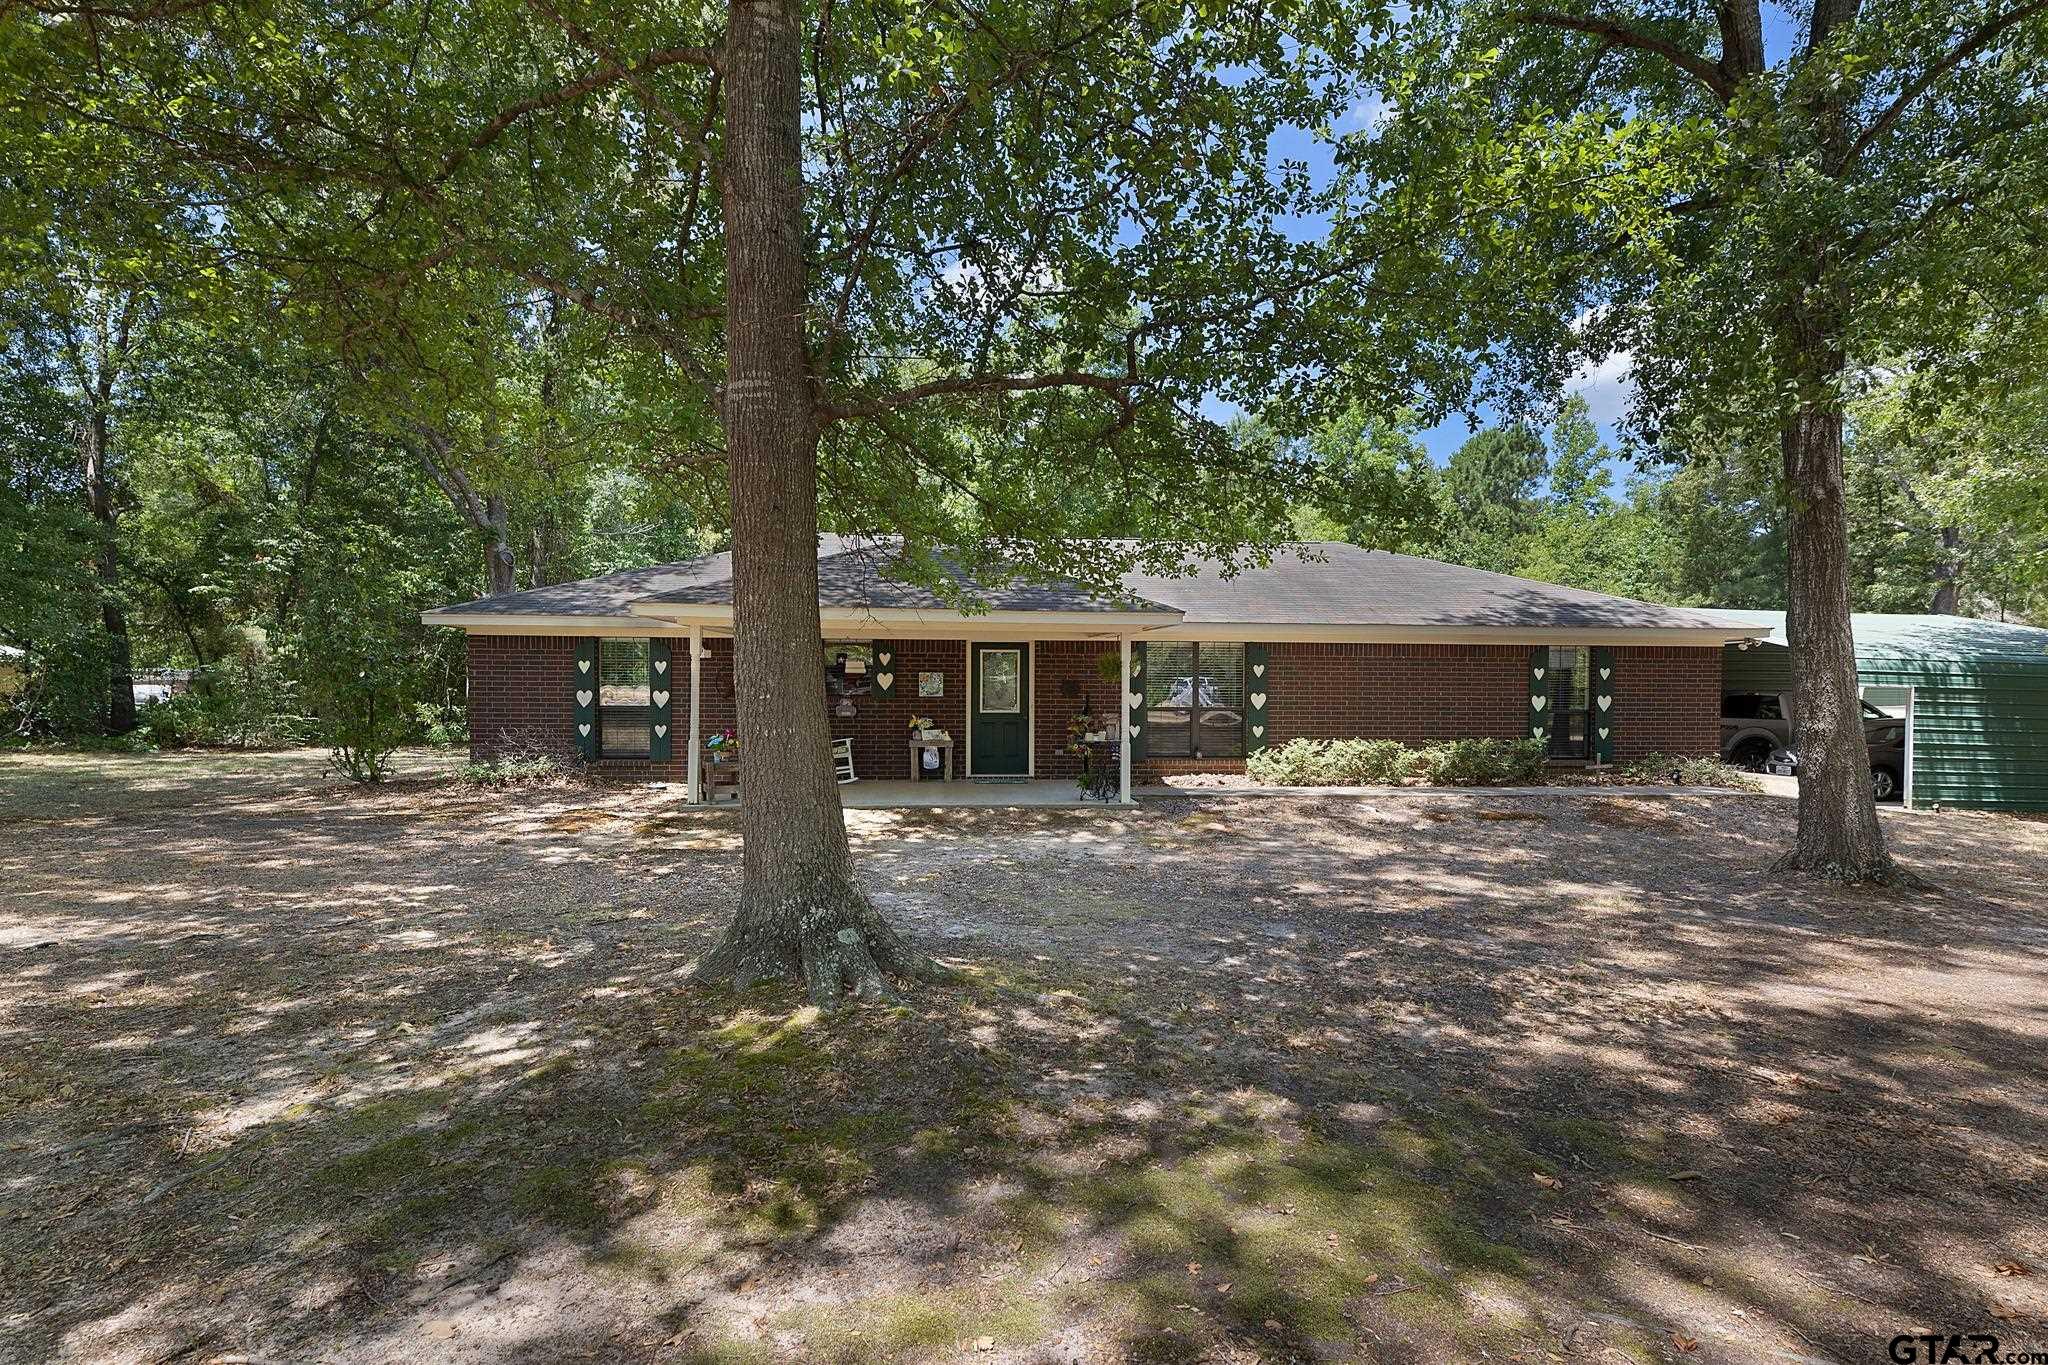 WELL MAINTAINED 3BR 2BA HOME ON 2.3 ACRES.NEW HOT WATER HEATER 7/2020 AND NEW HVAC INSIDE AND OUT 7/2021.  CARPORT WITH ENCLOSED STORAGE AND 20X30 METAL SHOP ON SLAB. PROPERTY IS WOODED WITH BEAUTIFUL HARDWOODS. GREAT LOCATION CONVENIENT TO GILMER AND APPROXIMATELY 10 MINUTES TO LONGVIEW.